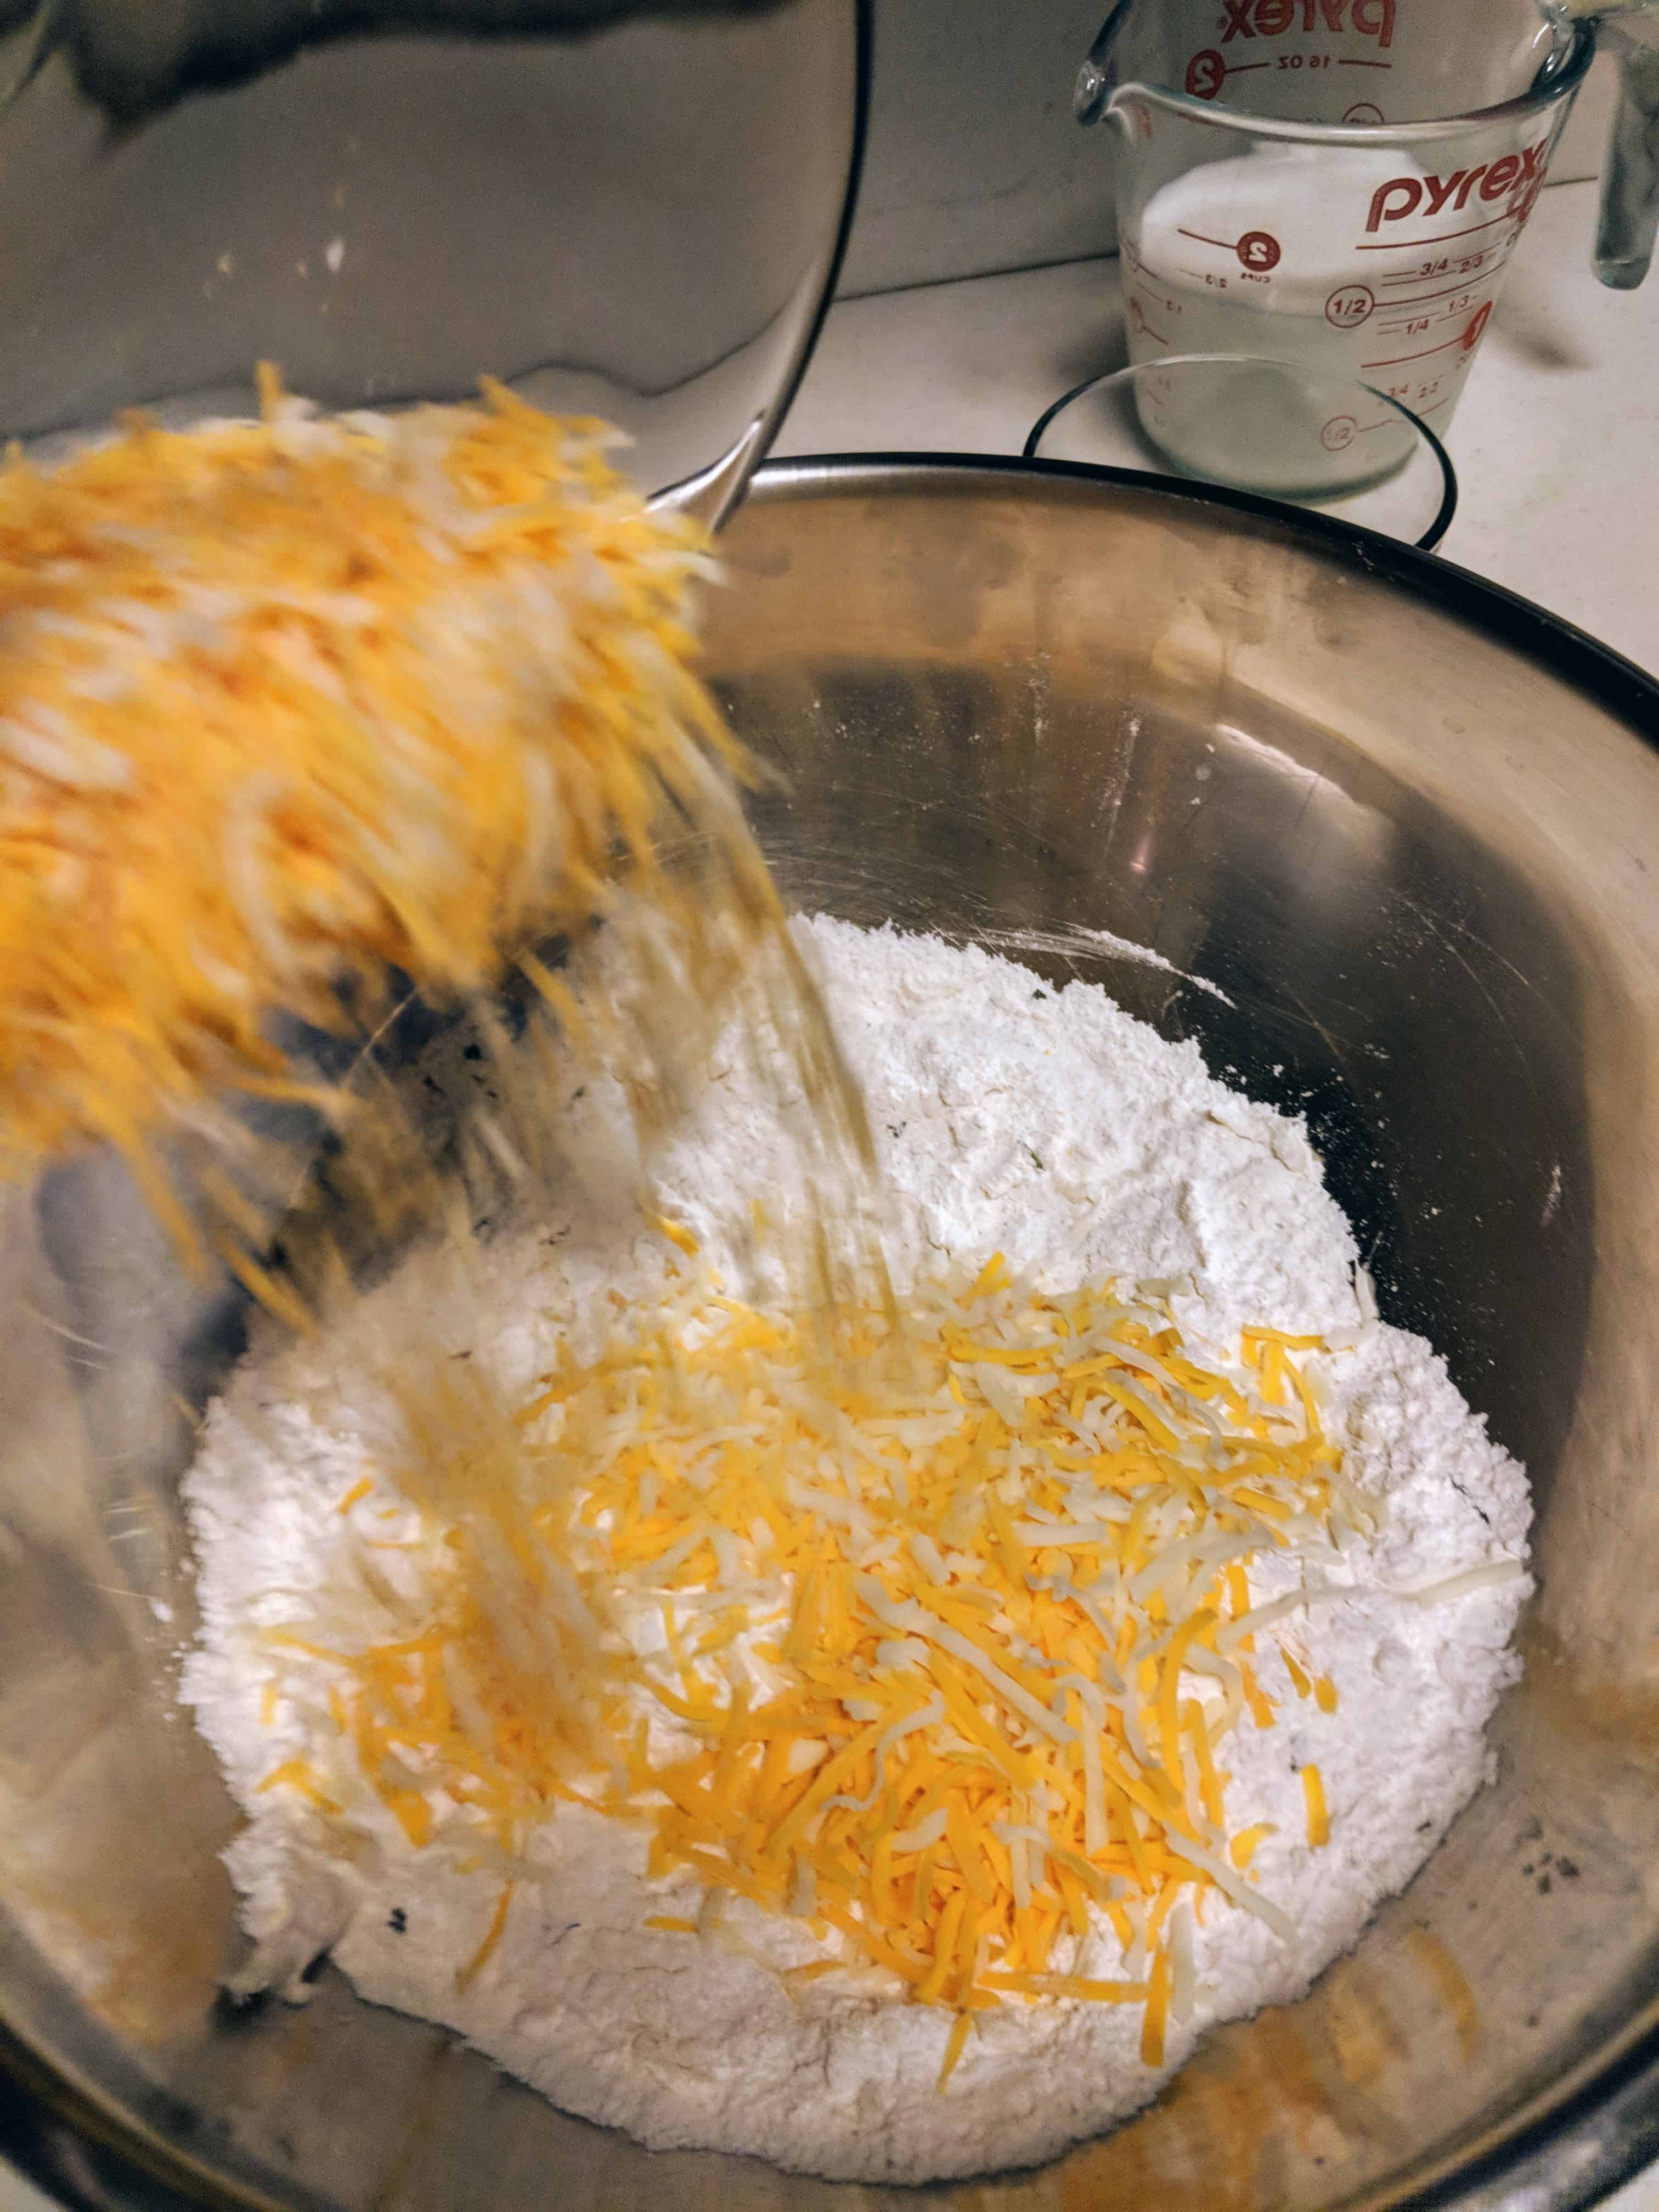 Add shredded cheese to the dry ingredients and butter. Mix well.